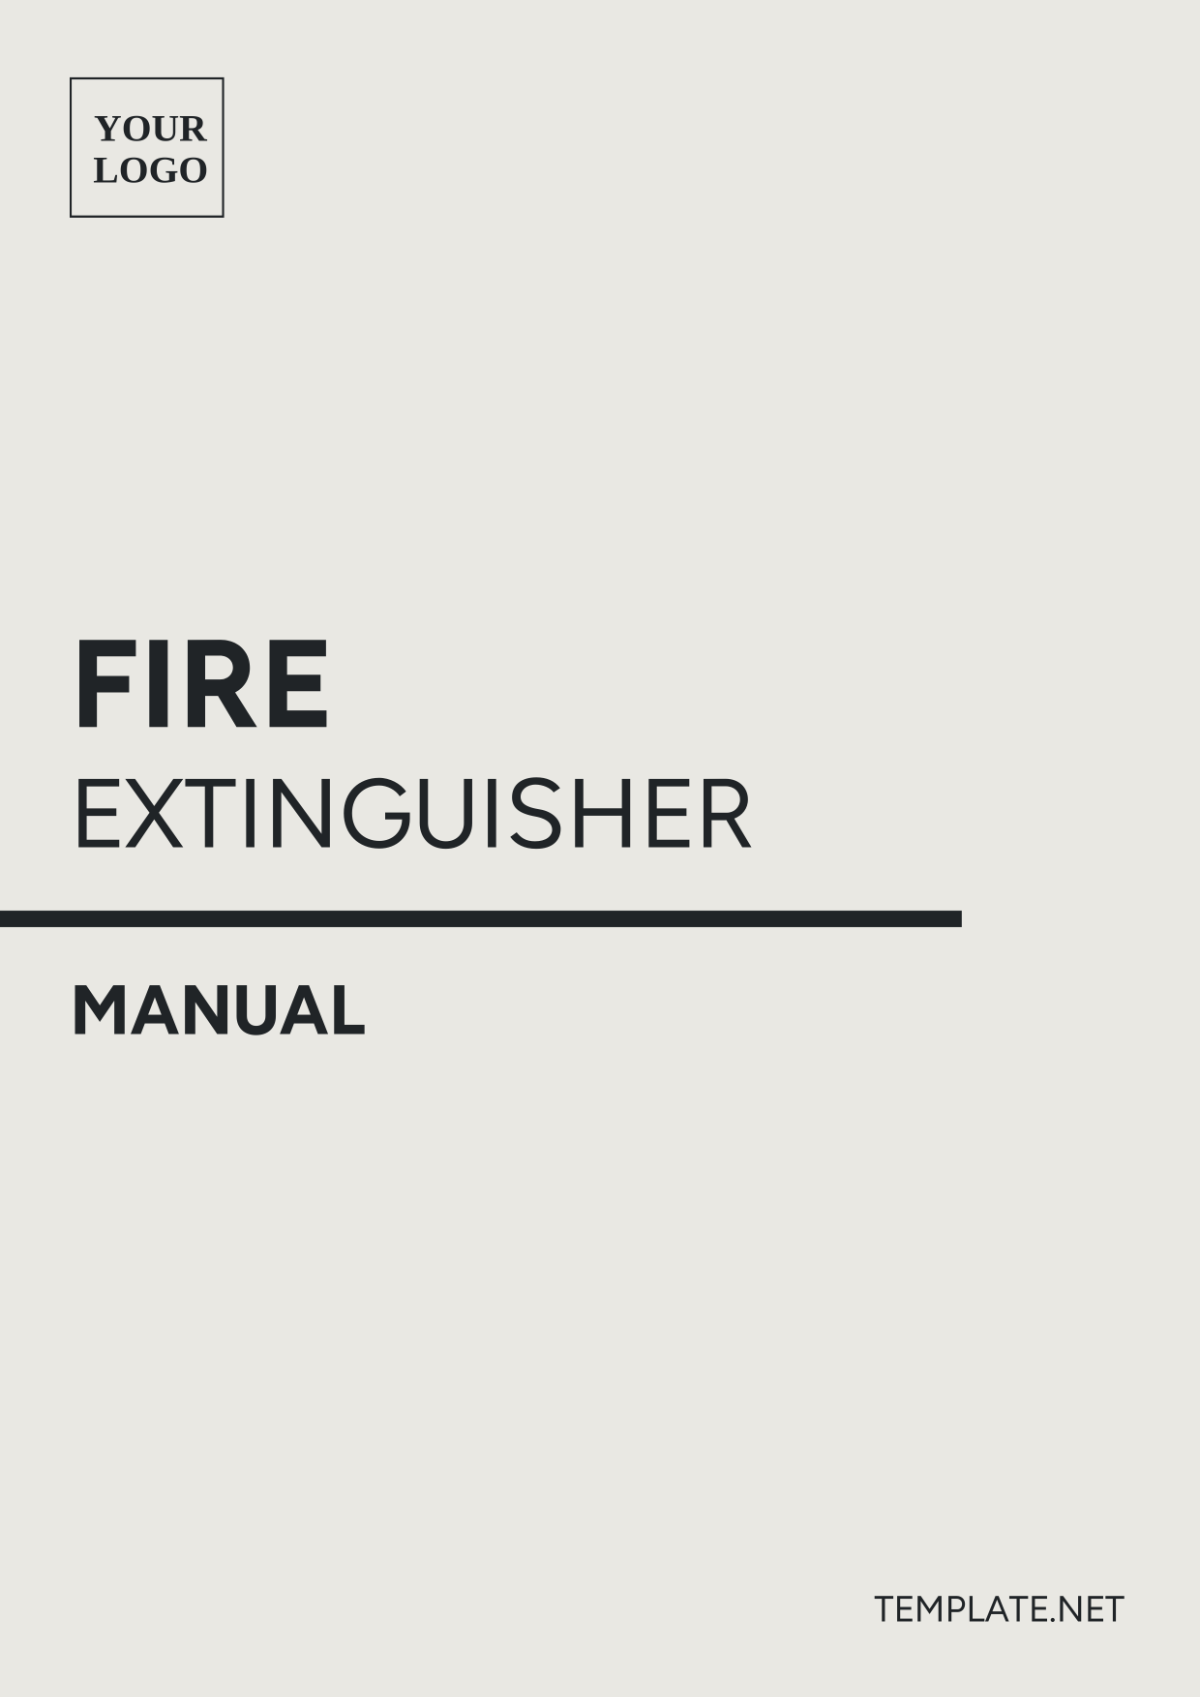 Fire Extinguisher Manual Template